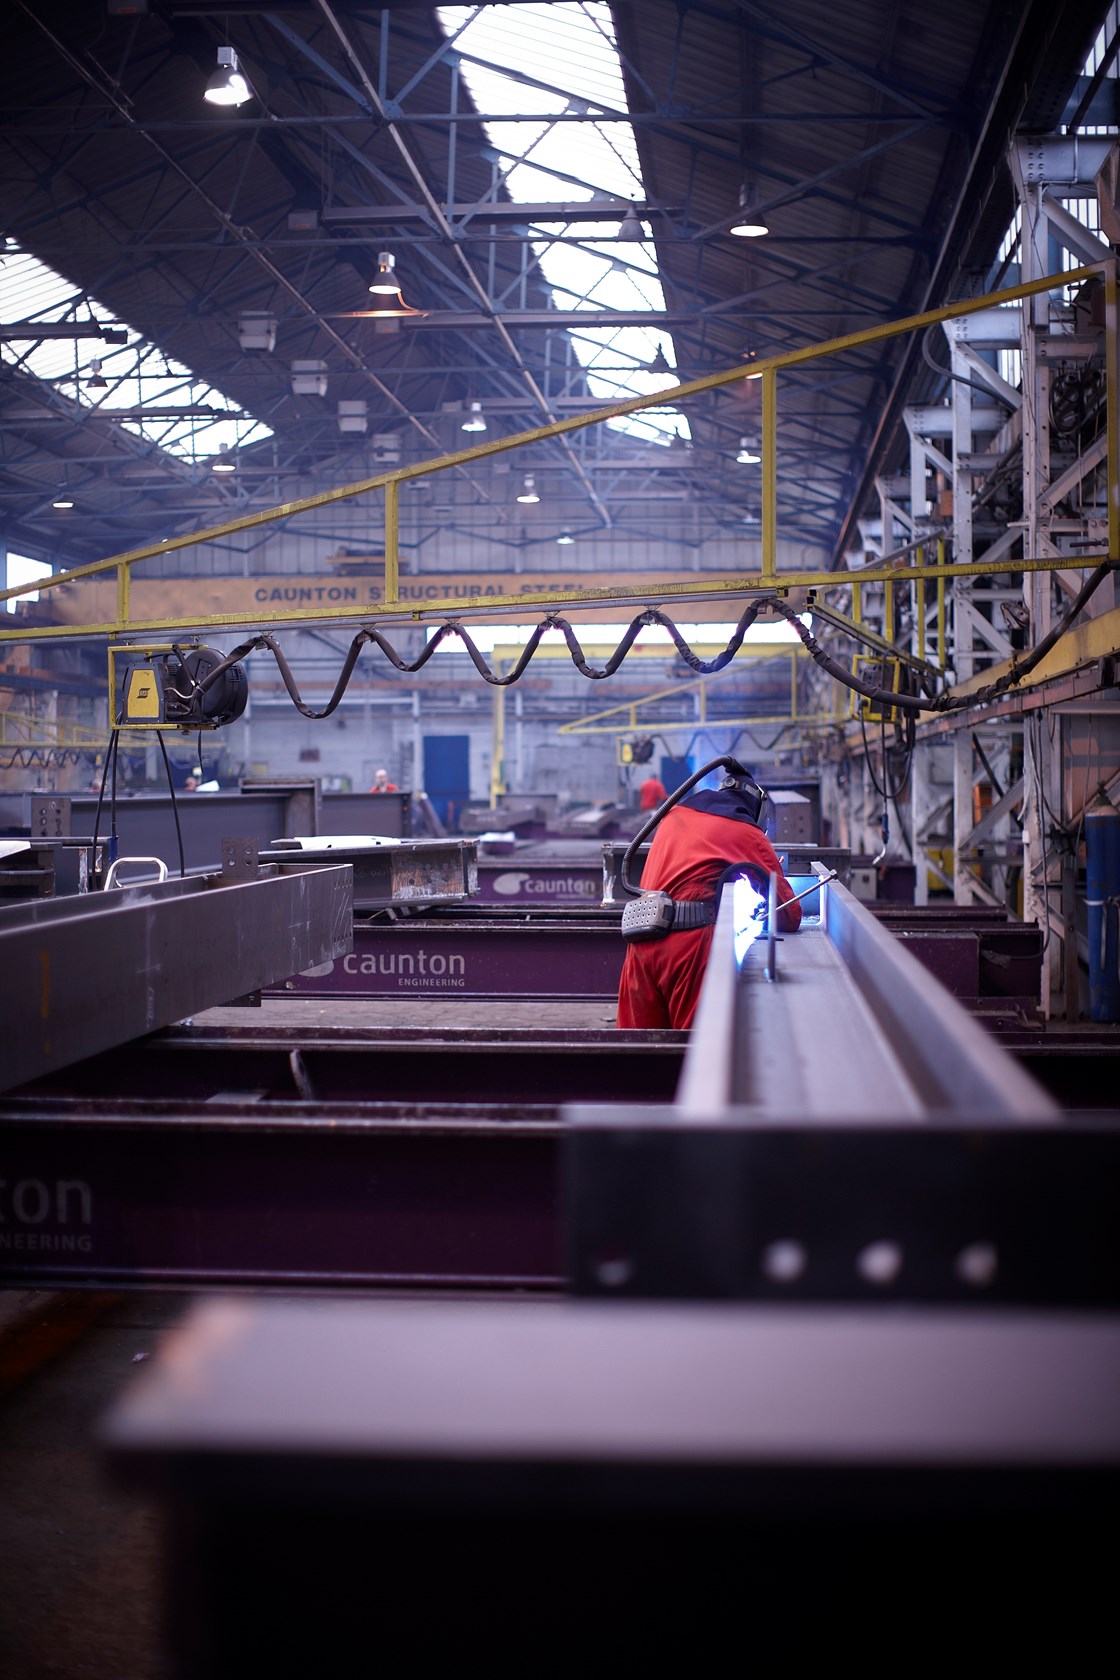 Cauton Engineering image of the Moorgreen facility September 2020: (factory, people working, factory, industry, jobs, portrait)